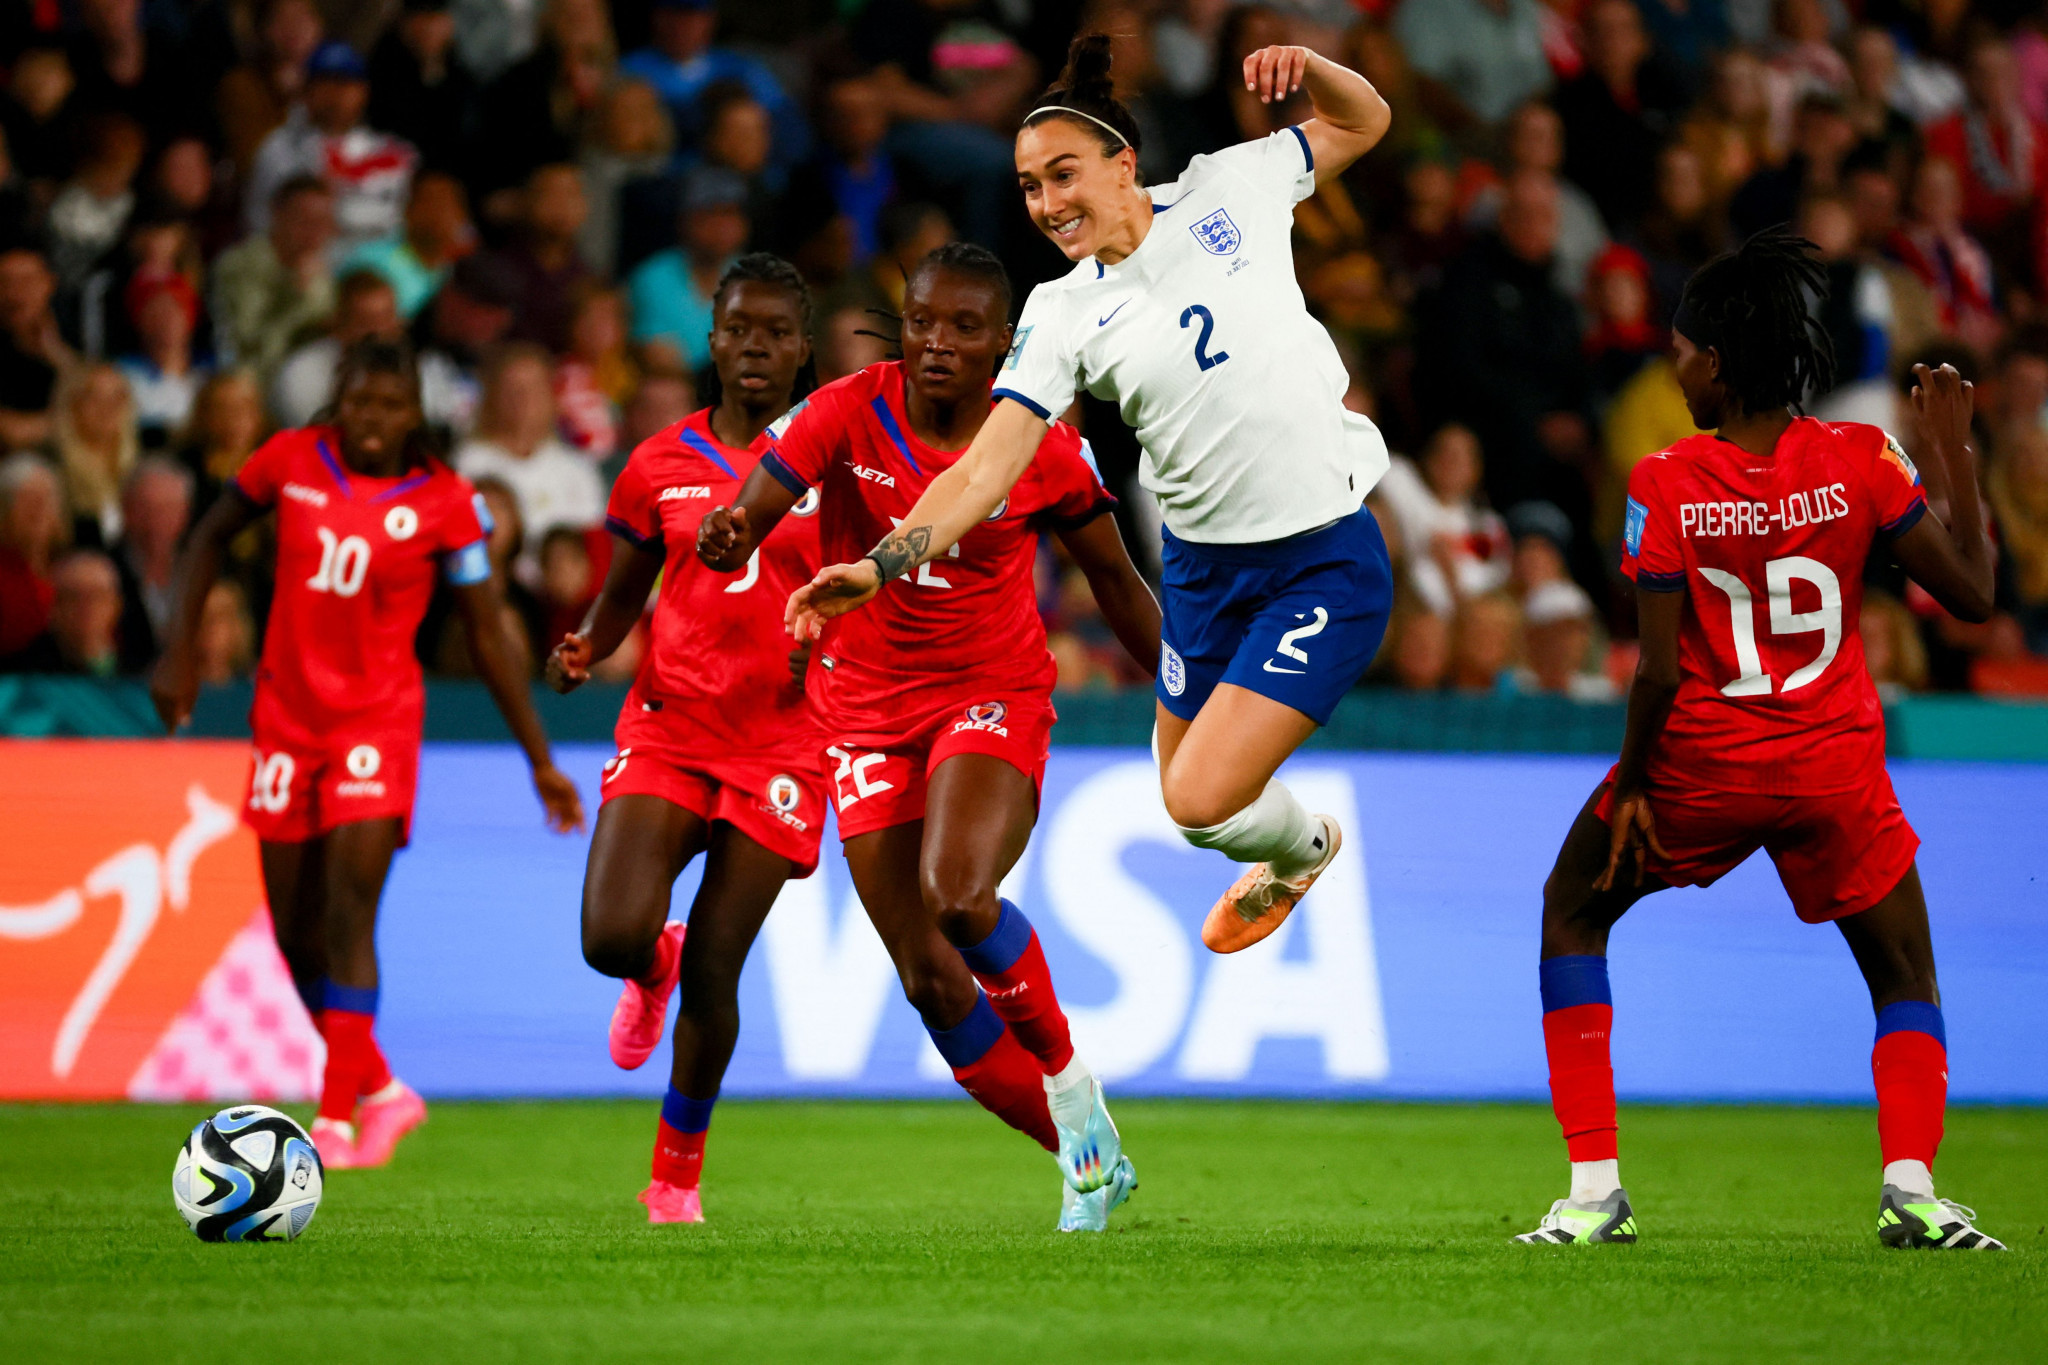 Lower-ranked teams at the FIFA Women's World Cup in Australia and New Zealand, such as Haiti, have been much more competitive than previous tournaments ©Getty Images